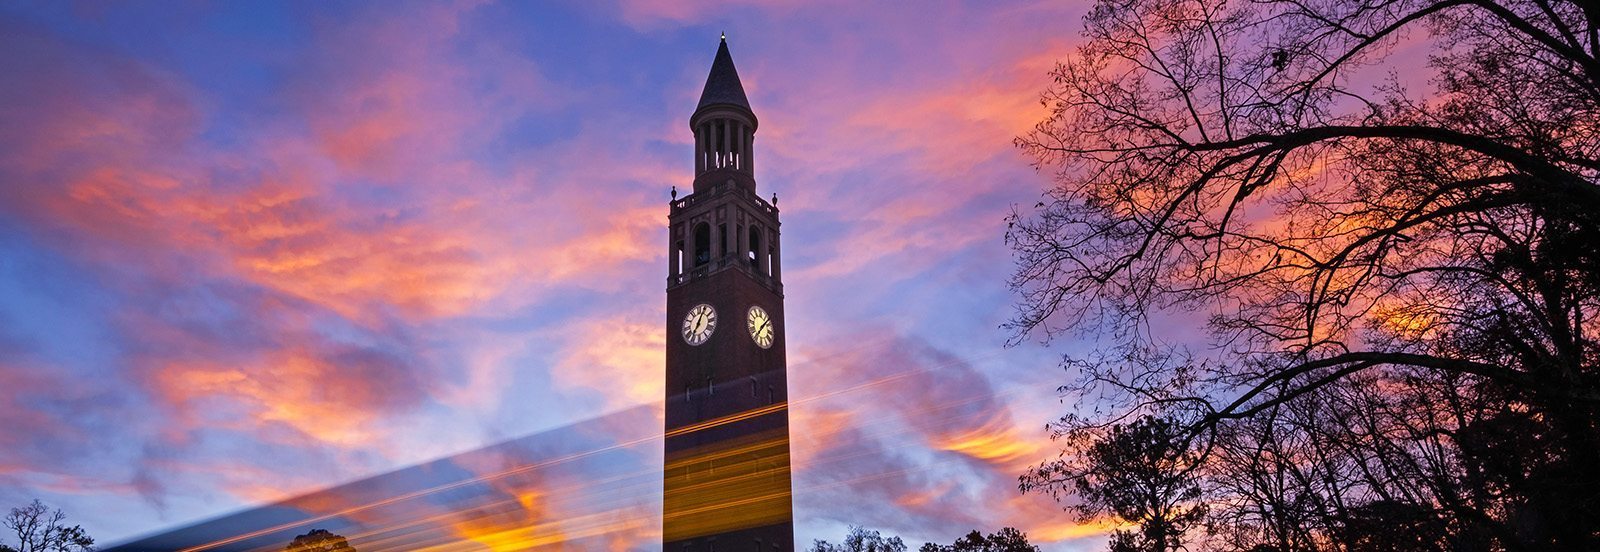 The Bell Tower at Sunset.